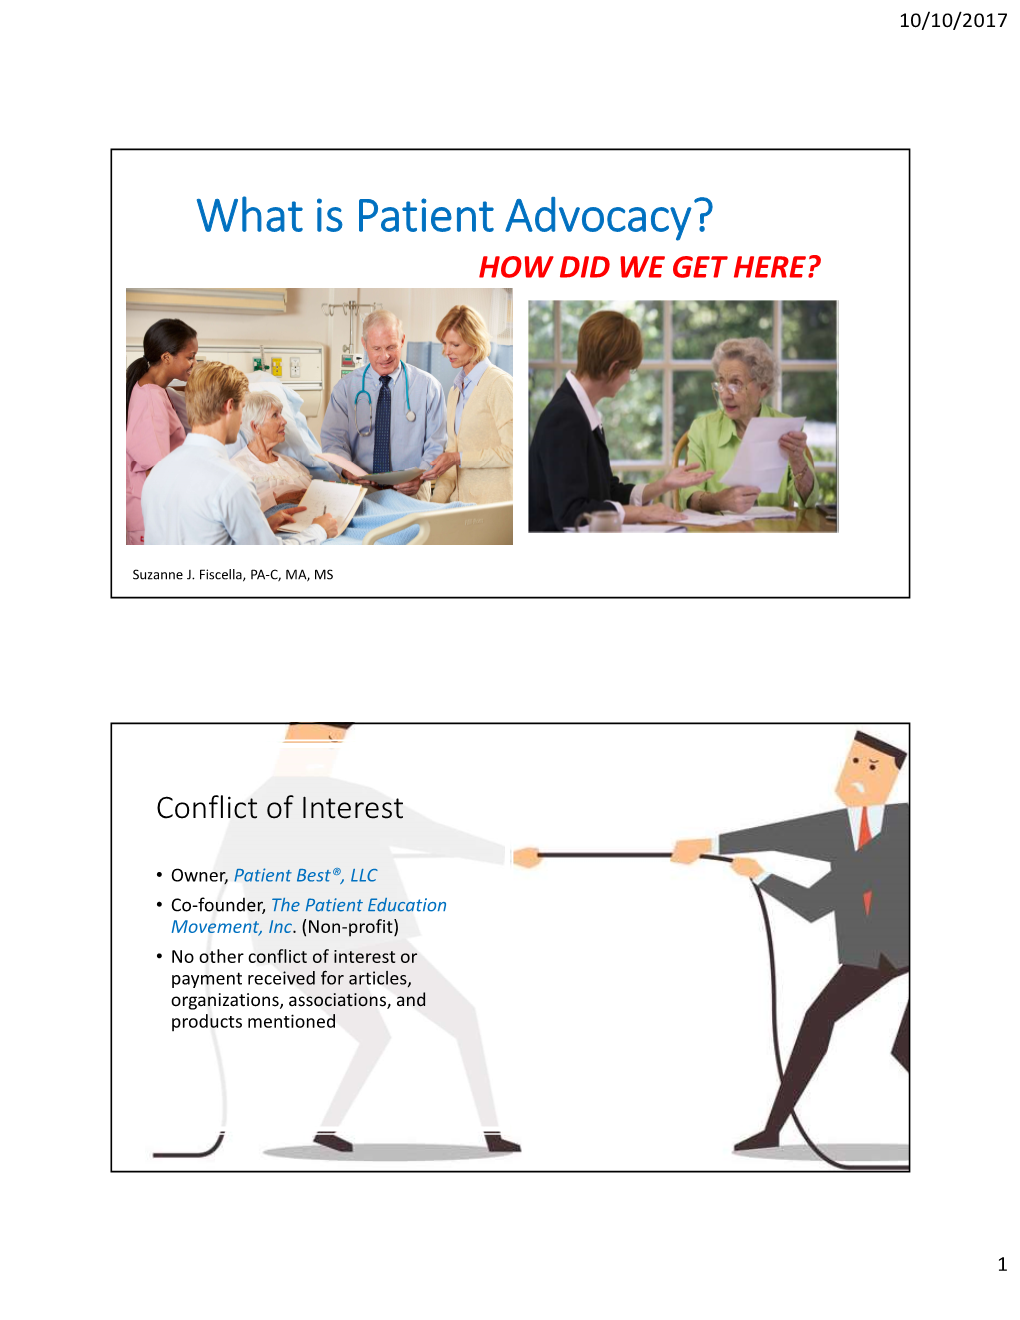 What Is Patient Advocacy? HOW DID WE GET HERE?